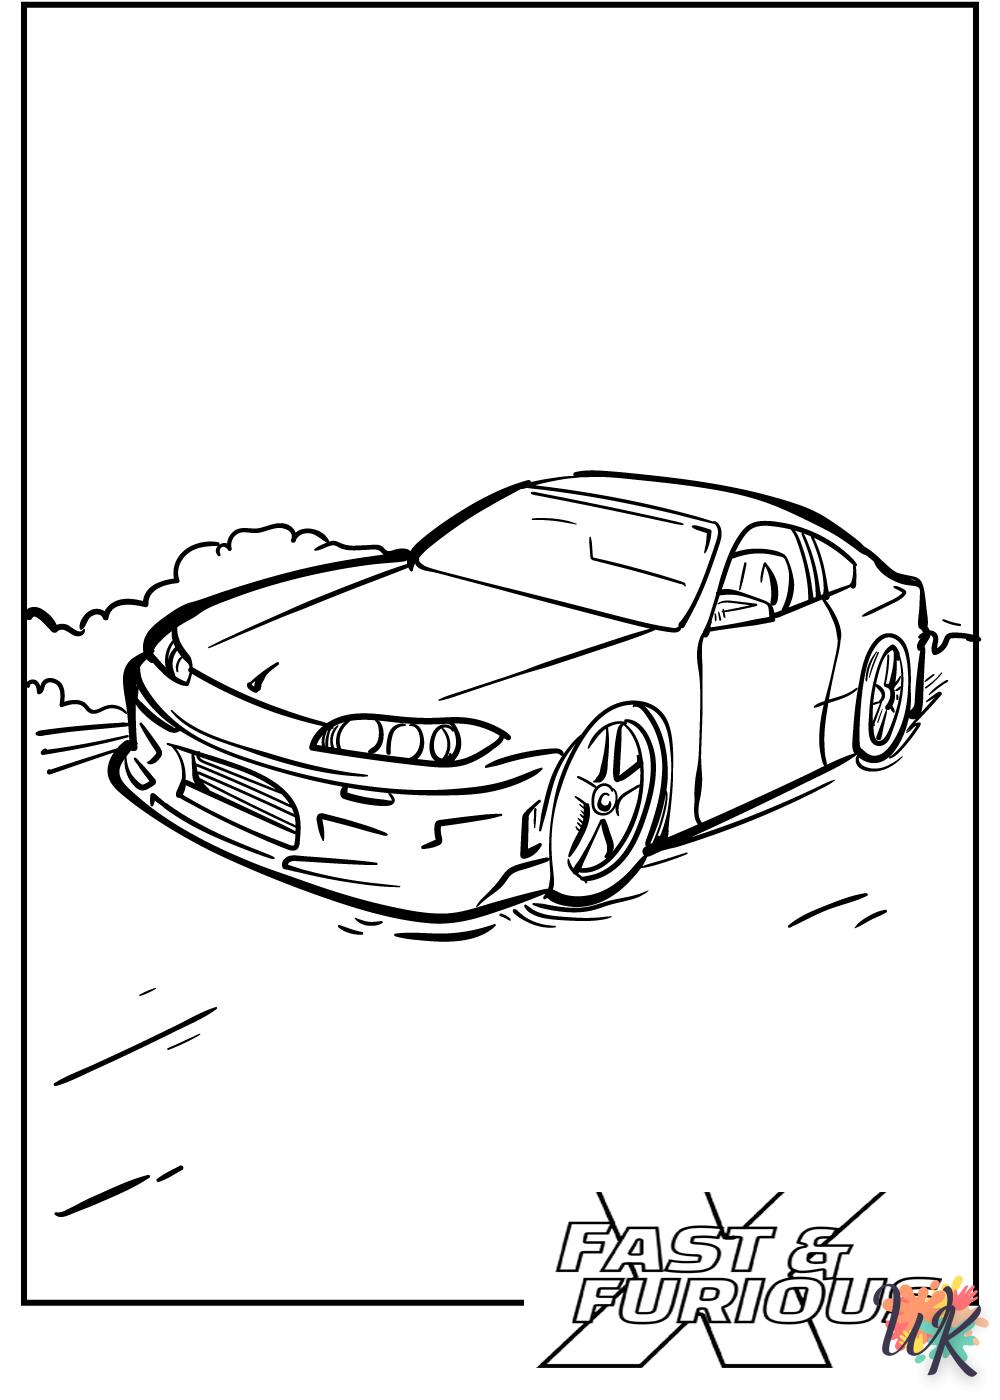 Fast And Furious 10 free coloring pages